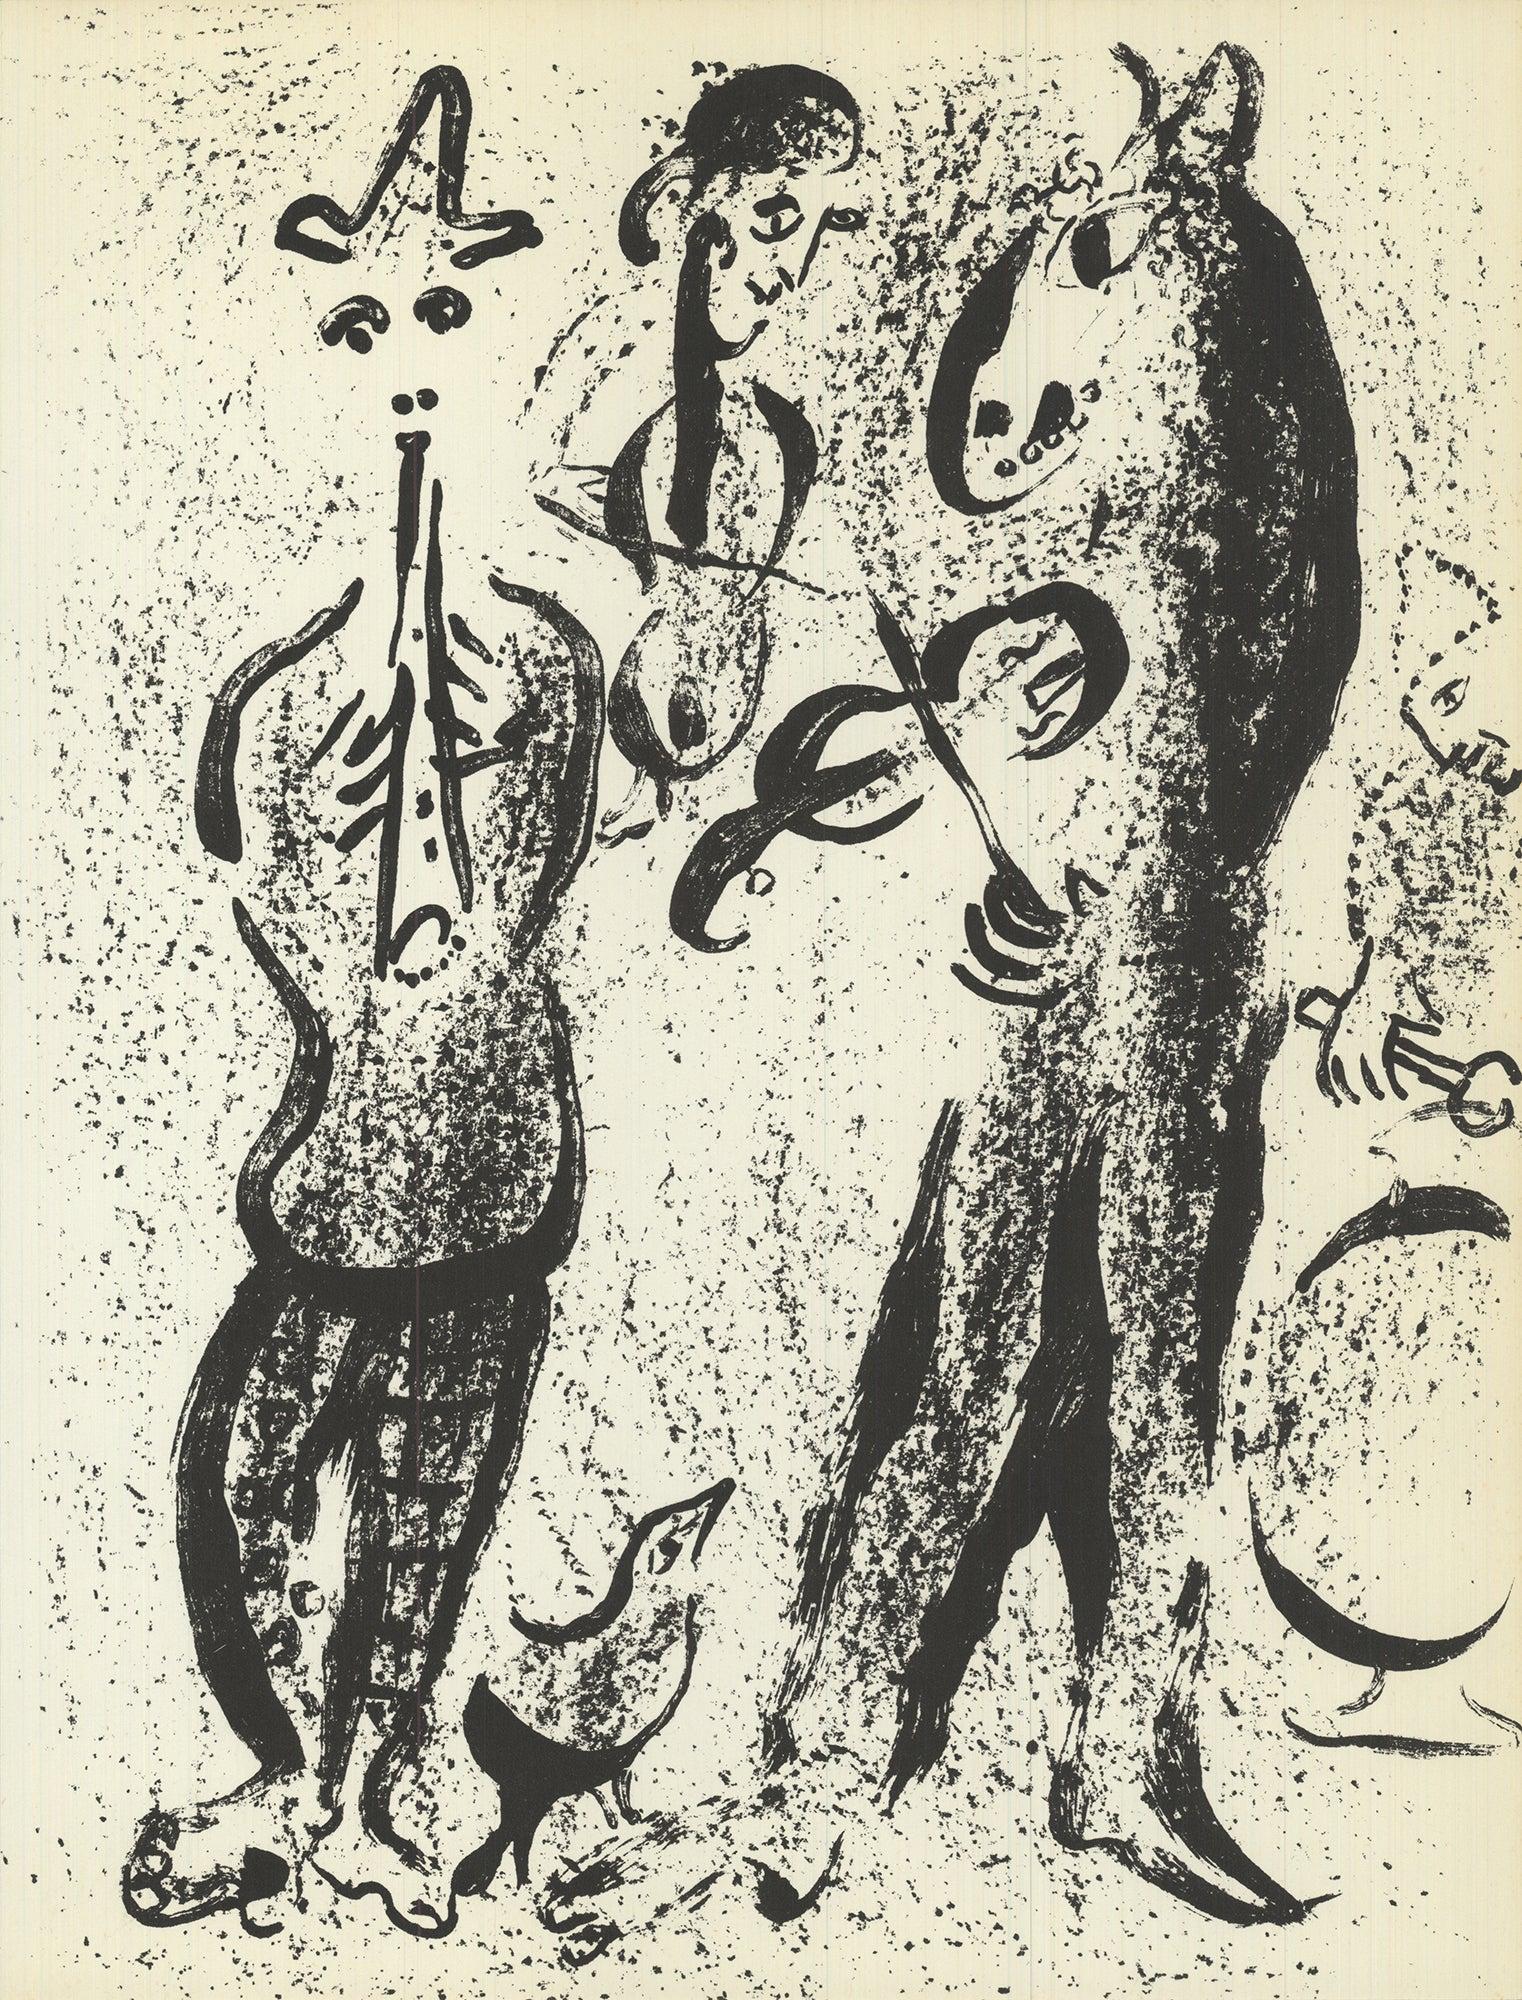 Paper Size: 12 x 9.5 inches ( 30.48 x 24.13 cm )
Image Size: 12 x 9.5 inches ( 30.48 x 24.13 cm )
Framed: No
Condition: A-: Near Mint, very light signs of handling
Additional Details: First release lithograph by Marc Chagall from the book